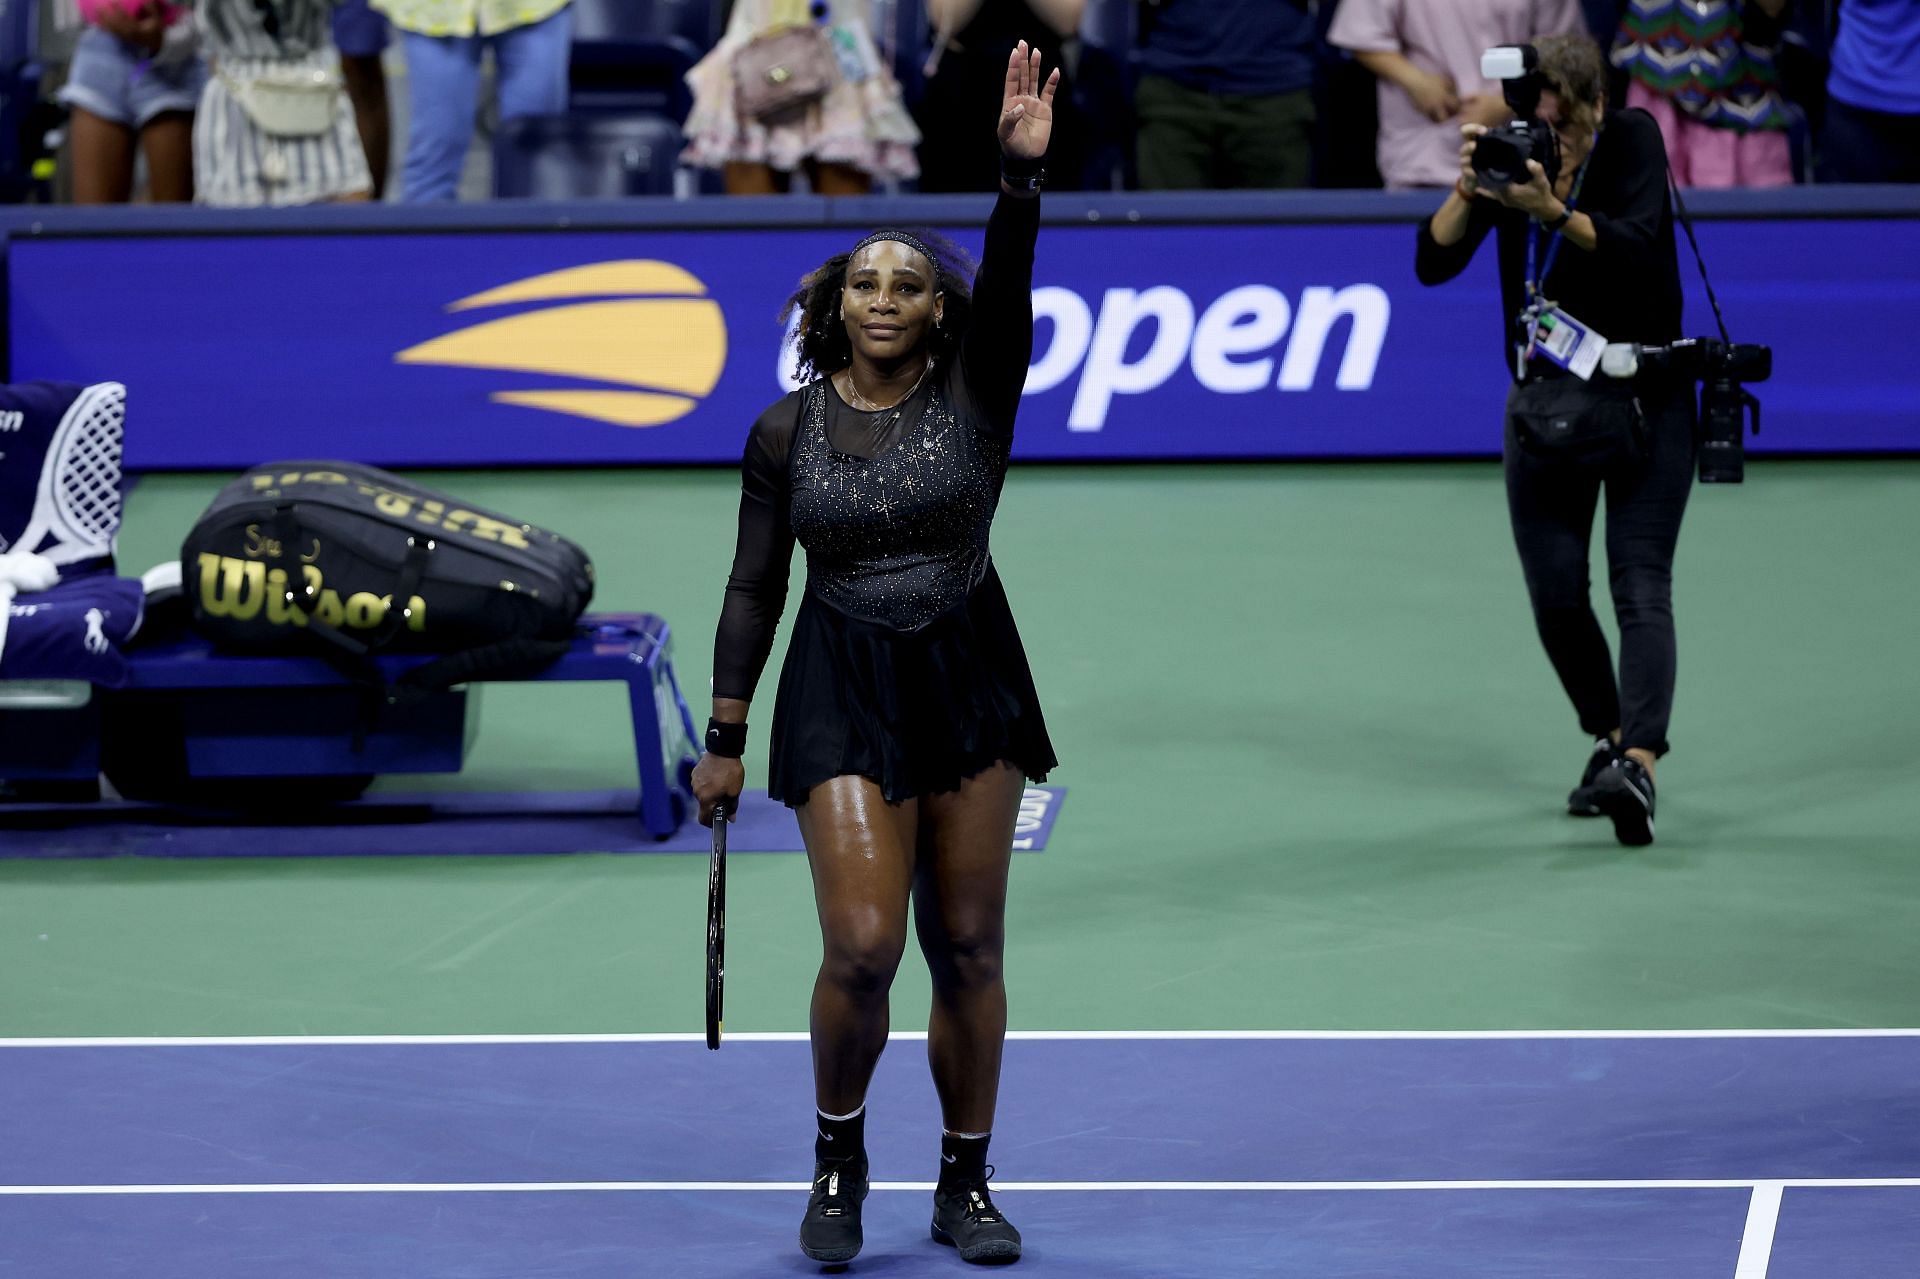 Williams retired at the 2022 US Open